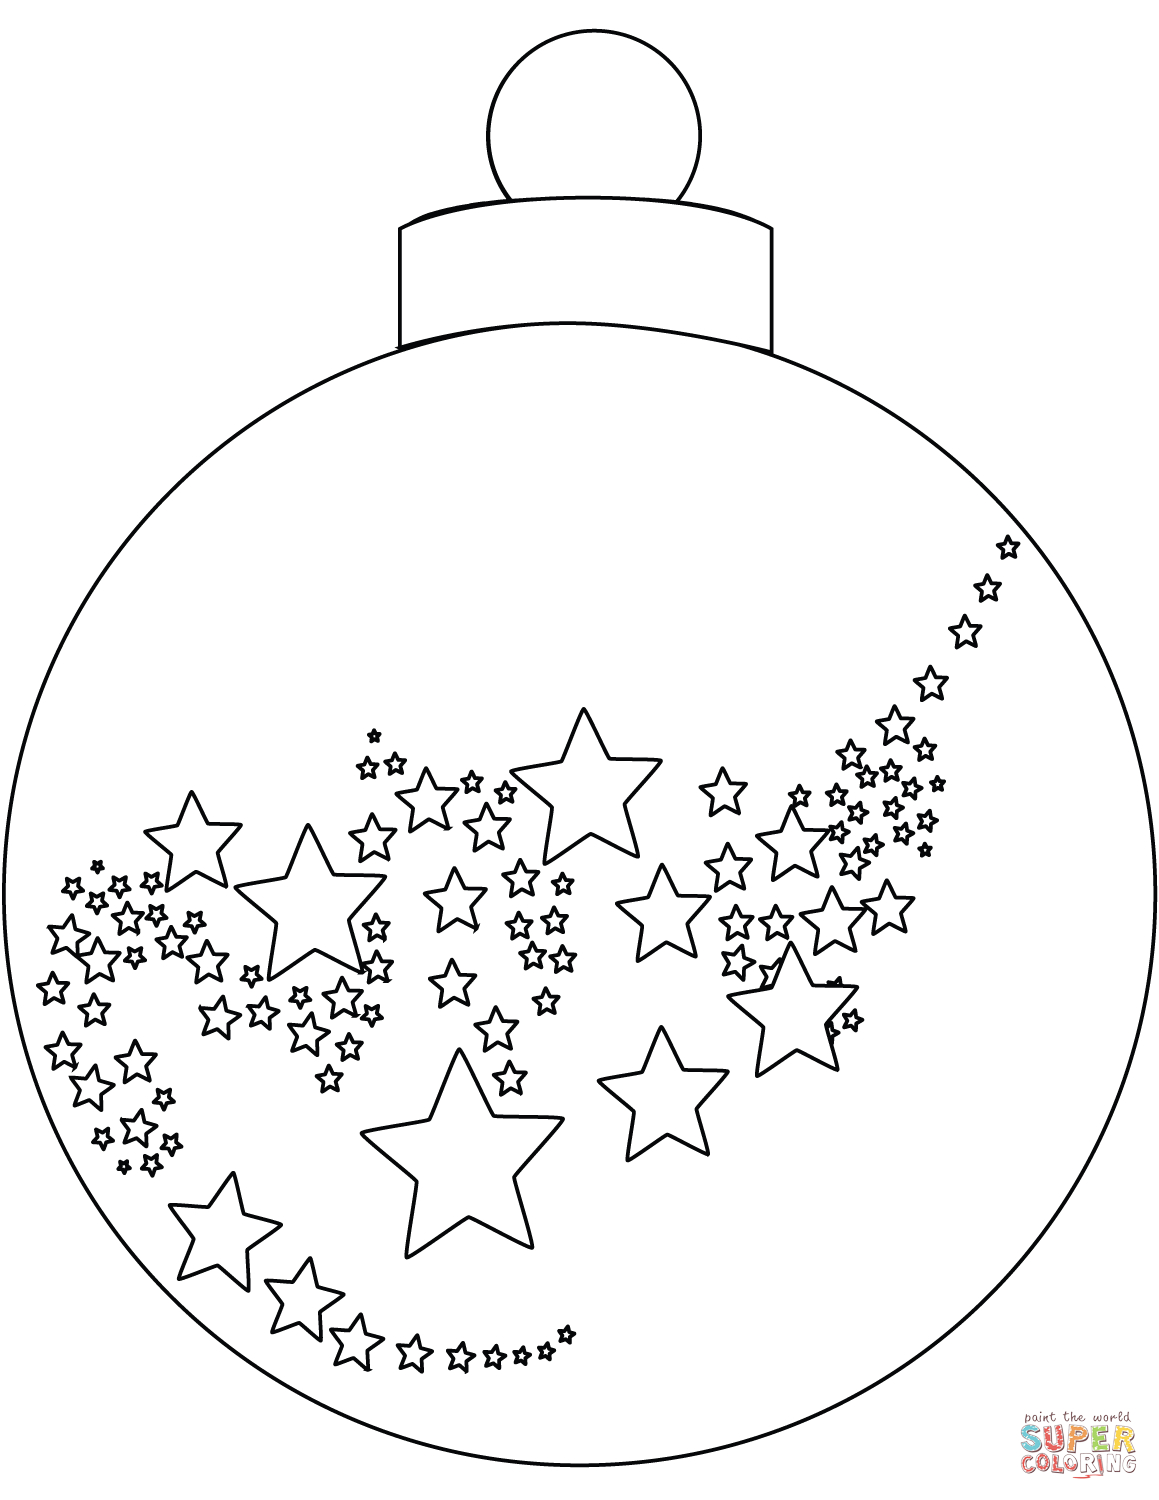 Christmas Ornament Coloring Page | Free Printable Coloring Pages - Free Printable Christmas Ornaments